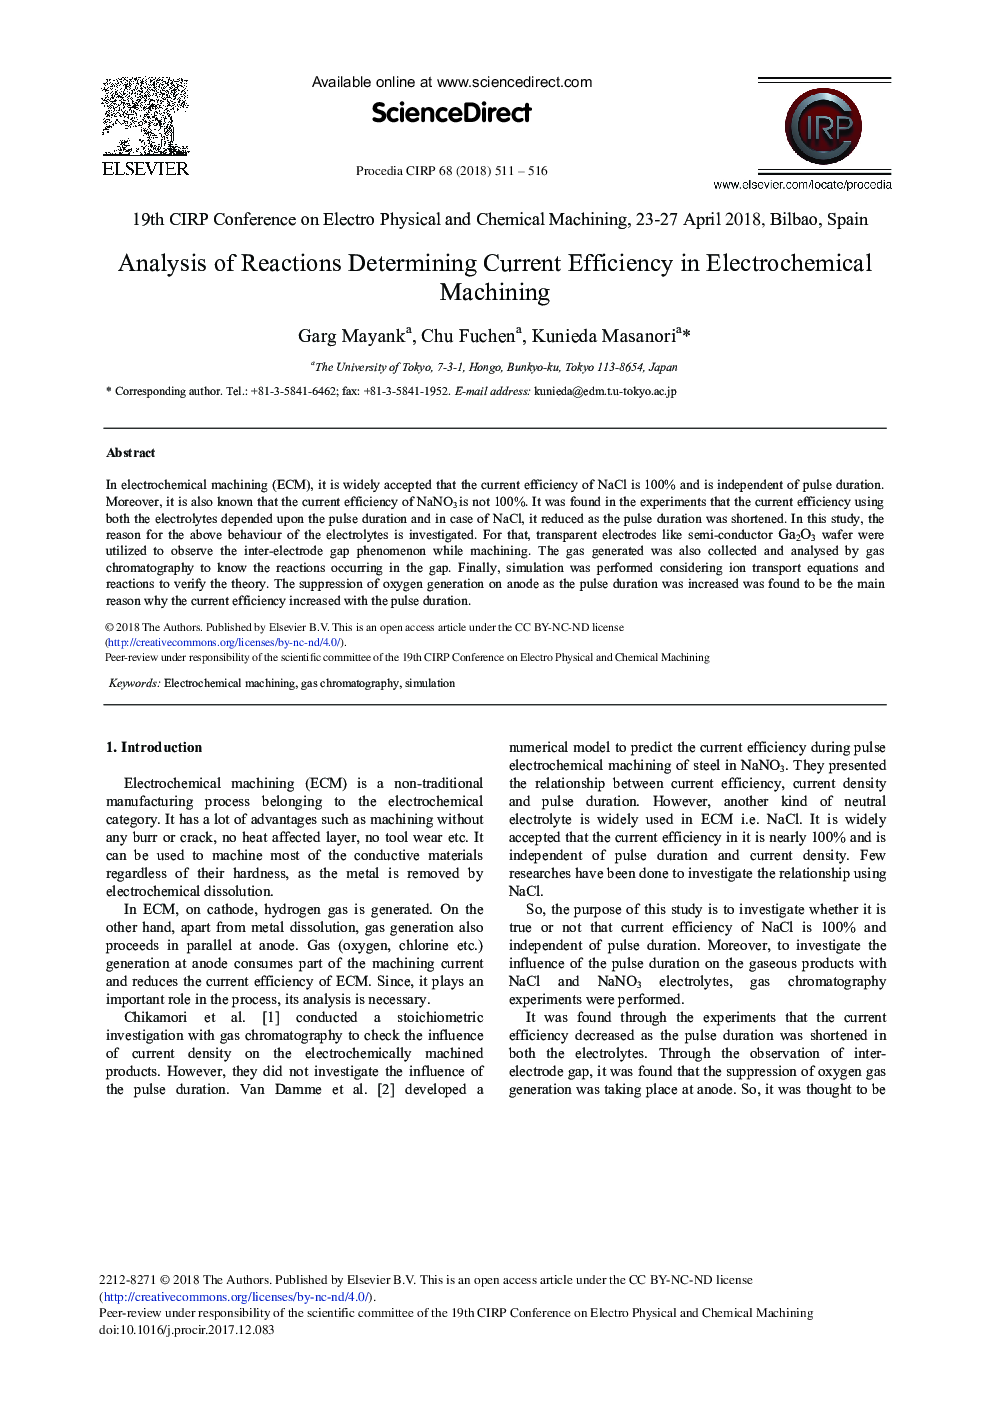 Analysis of Reactions Determining Current Efficiency in Electrochemical Machining